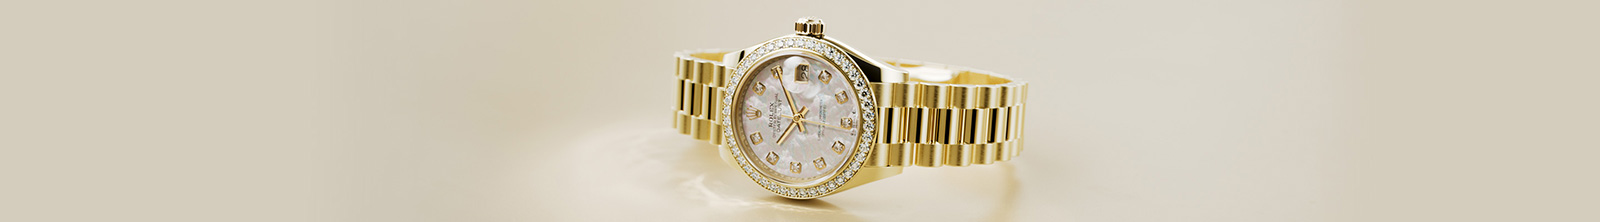 Ladies gold Rolex Datejust watch with link bracelet and diamond detail around dial